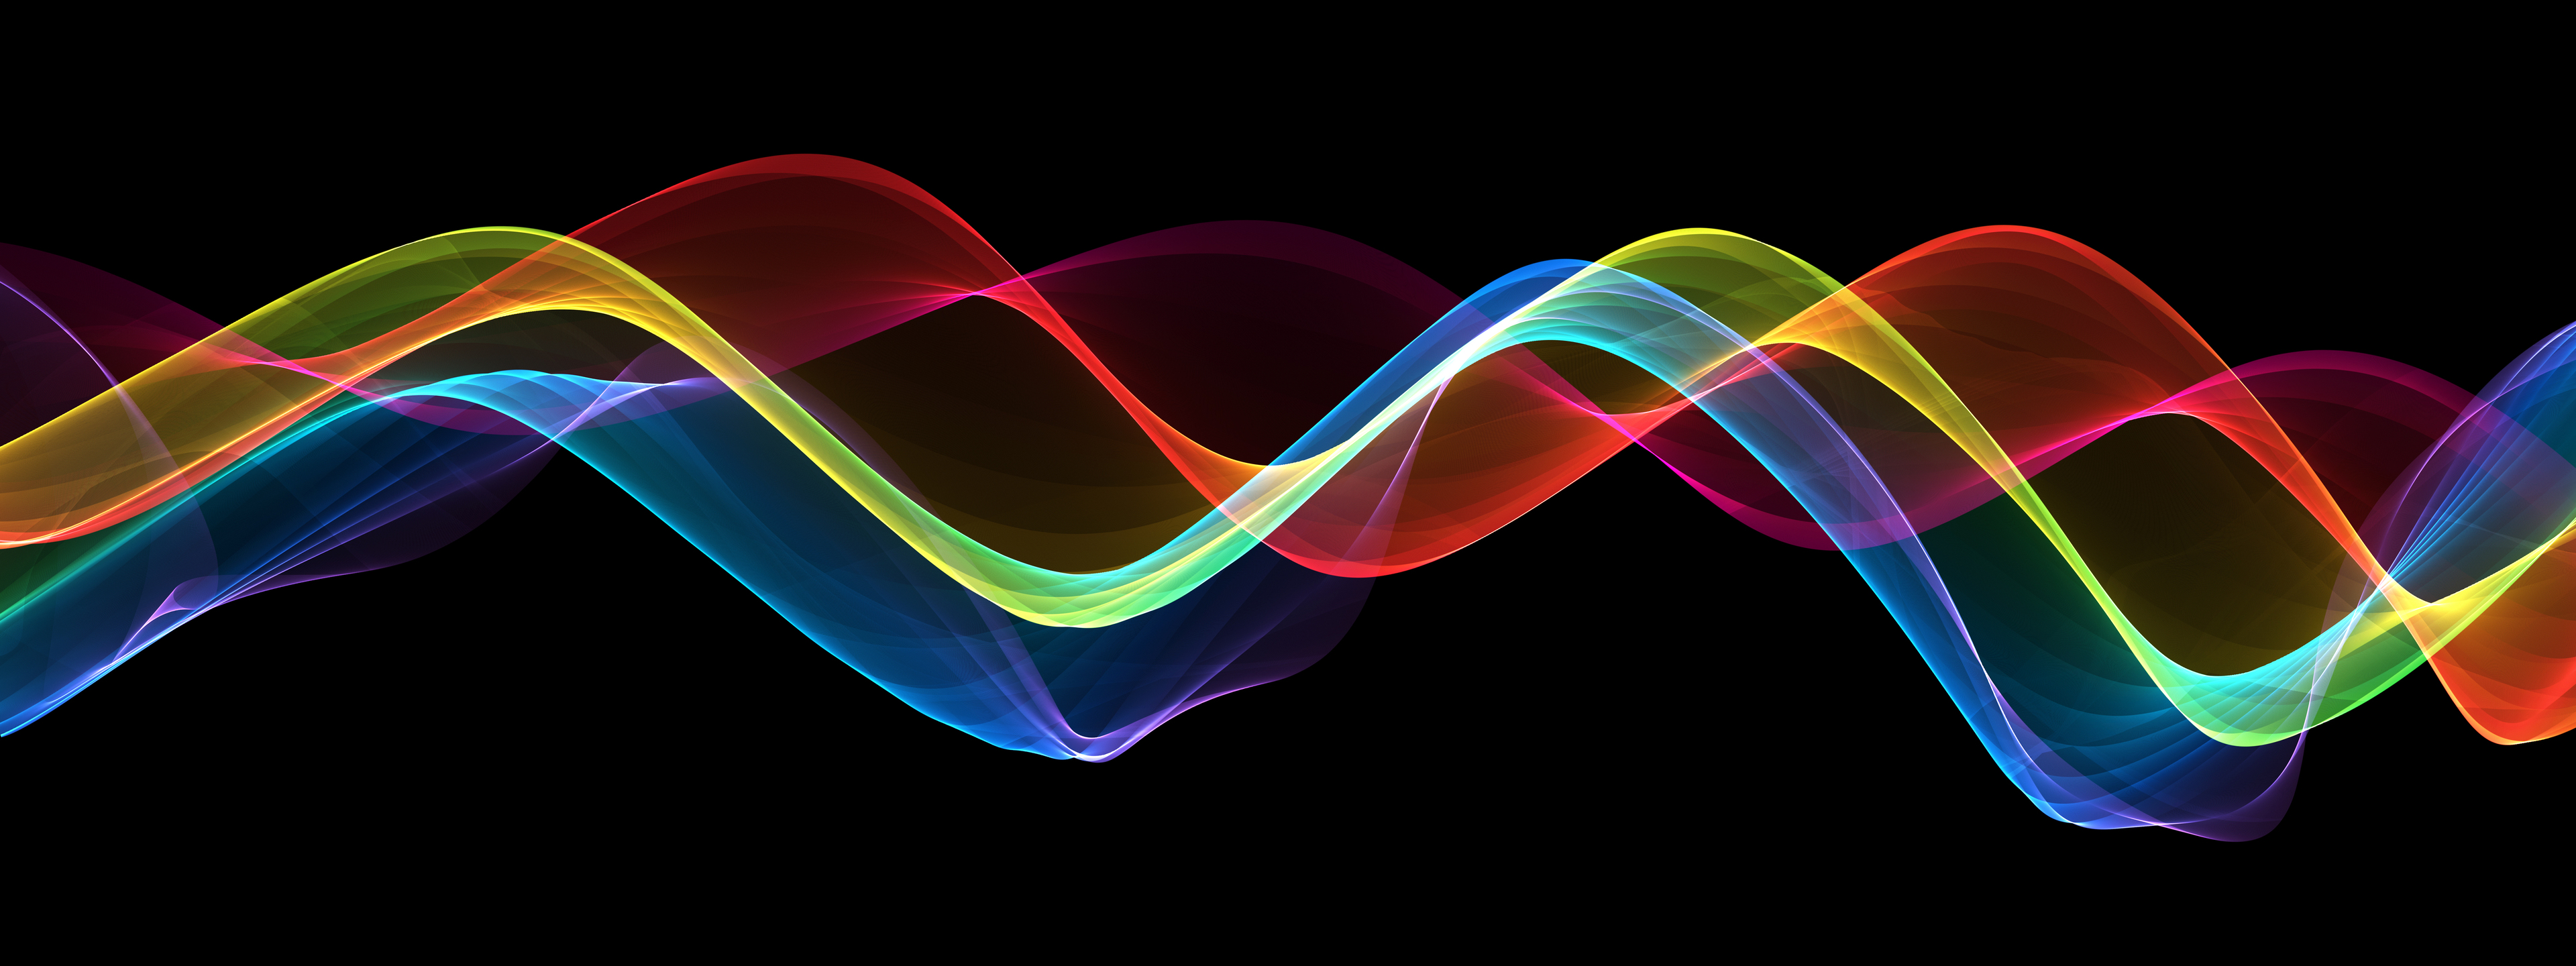 Abstract Wave Swirl Colorful Magical Neon Ribbon on Black Background. Energy Streams